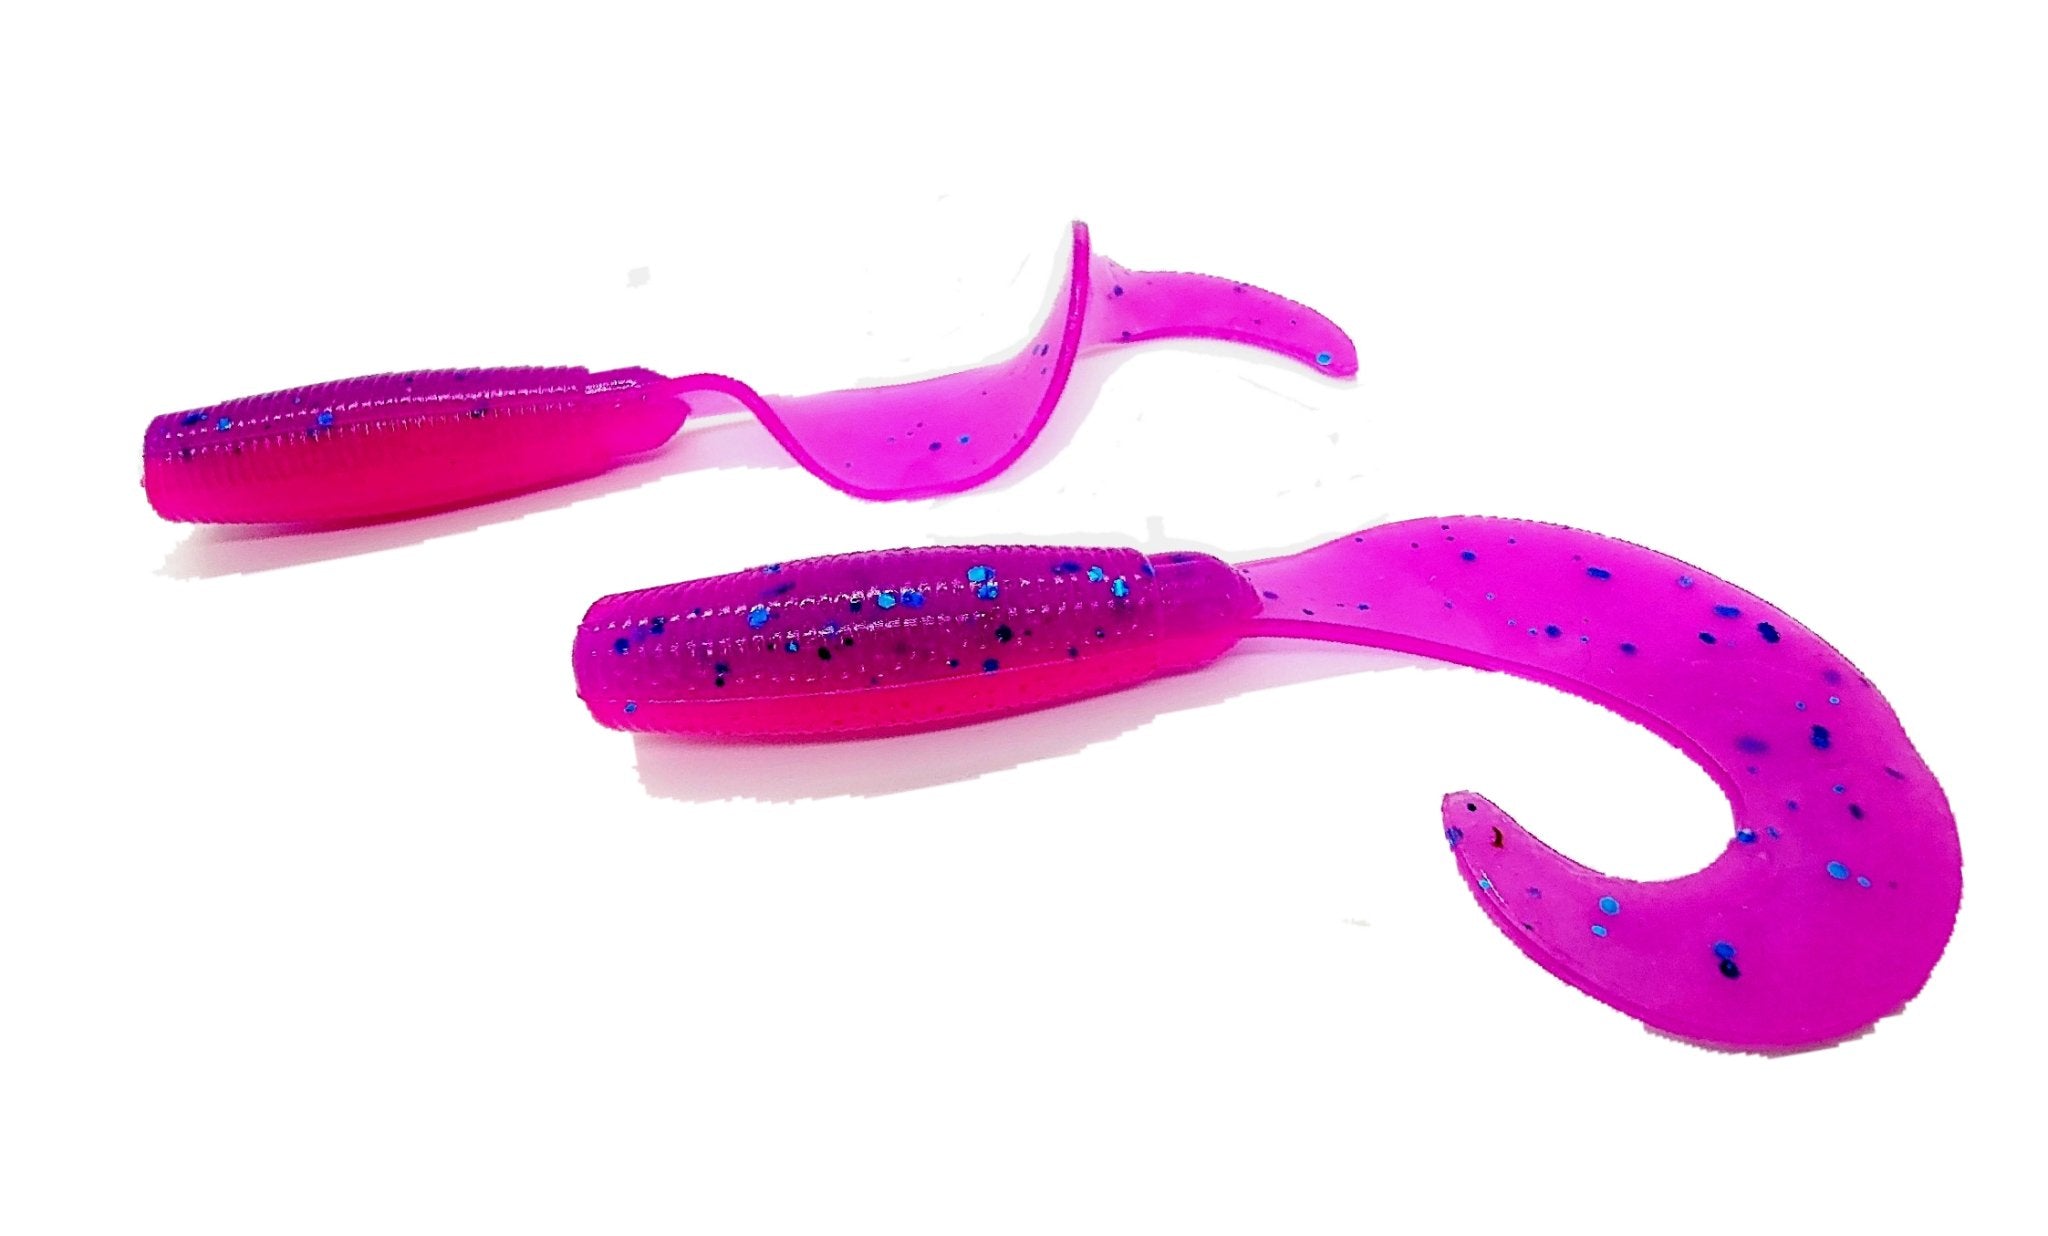  Lelands Lures, 50-Pack Split-Tail Grub Body Pack, Freshwater Fishing  Equipment And Accessories, Pink/Chartreuse